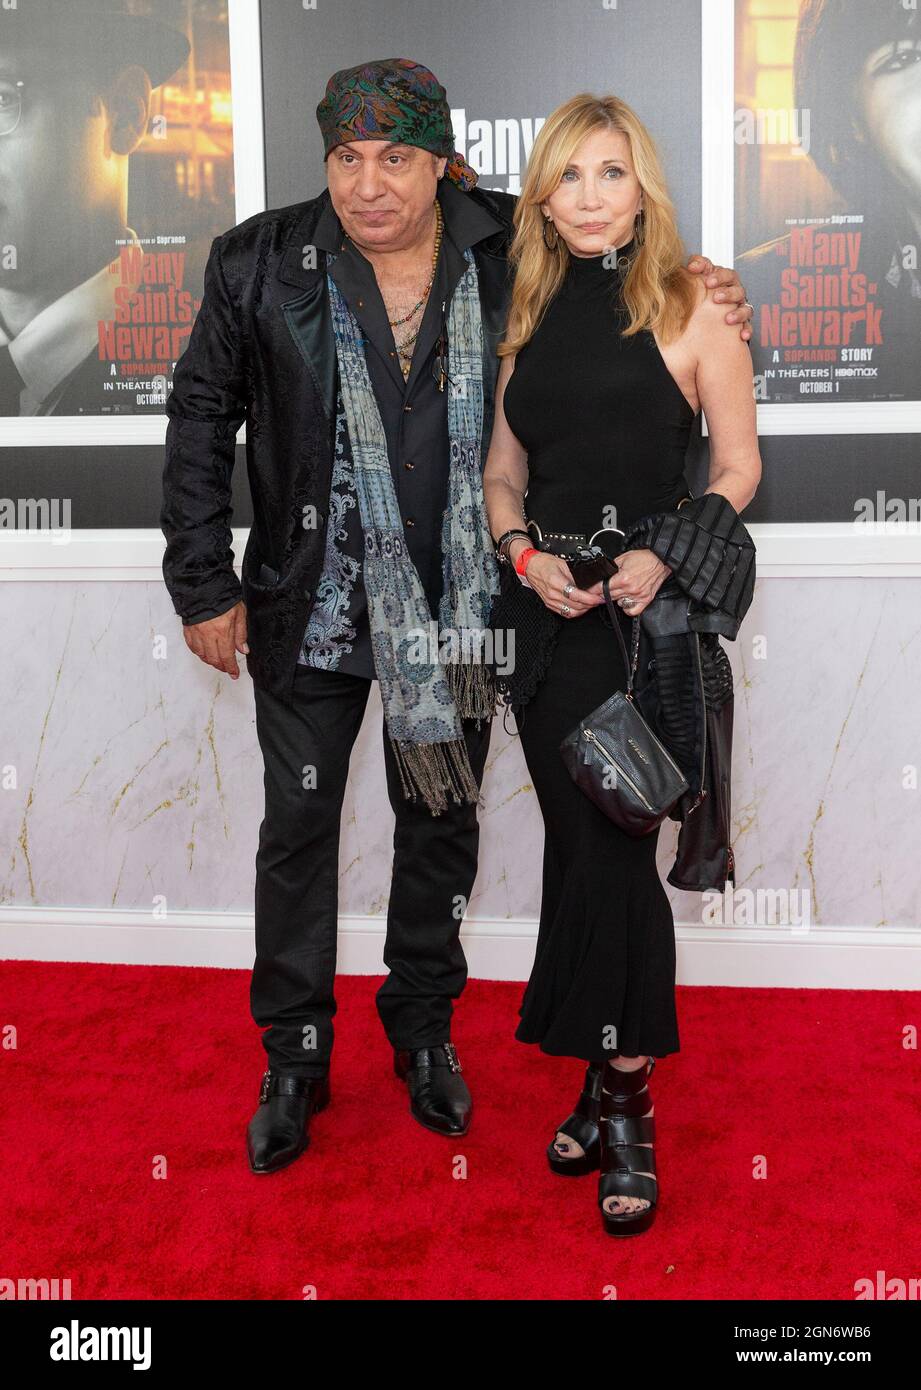 New York, United States. 21st Sep, 2021. Steven Van Zandt, Maureen Van Zandt attend premiere of The Many Saints of Newark movie at Beacon Theatre (Photo by Lev Radin/Pacific Press) Credit: Pacific Press Media Production Corp./Alamy Live News Stock Photo